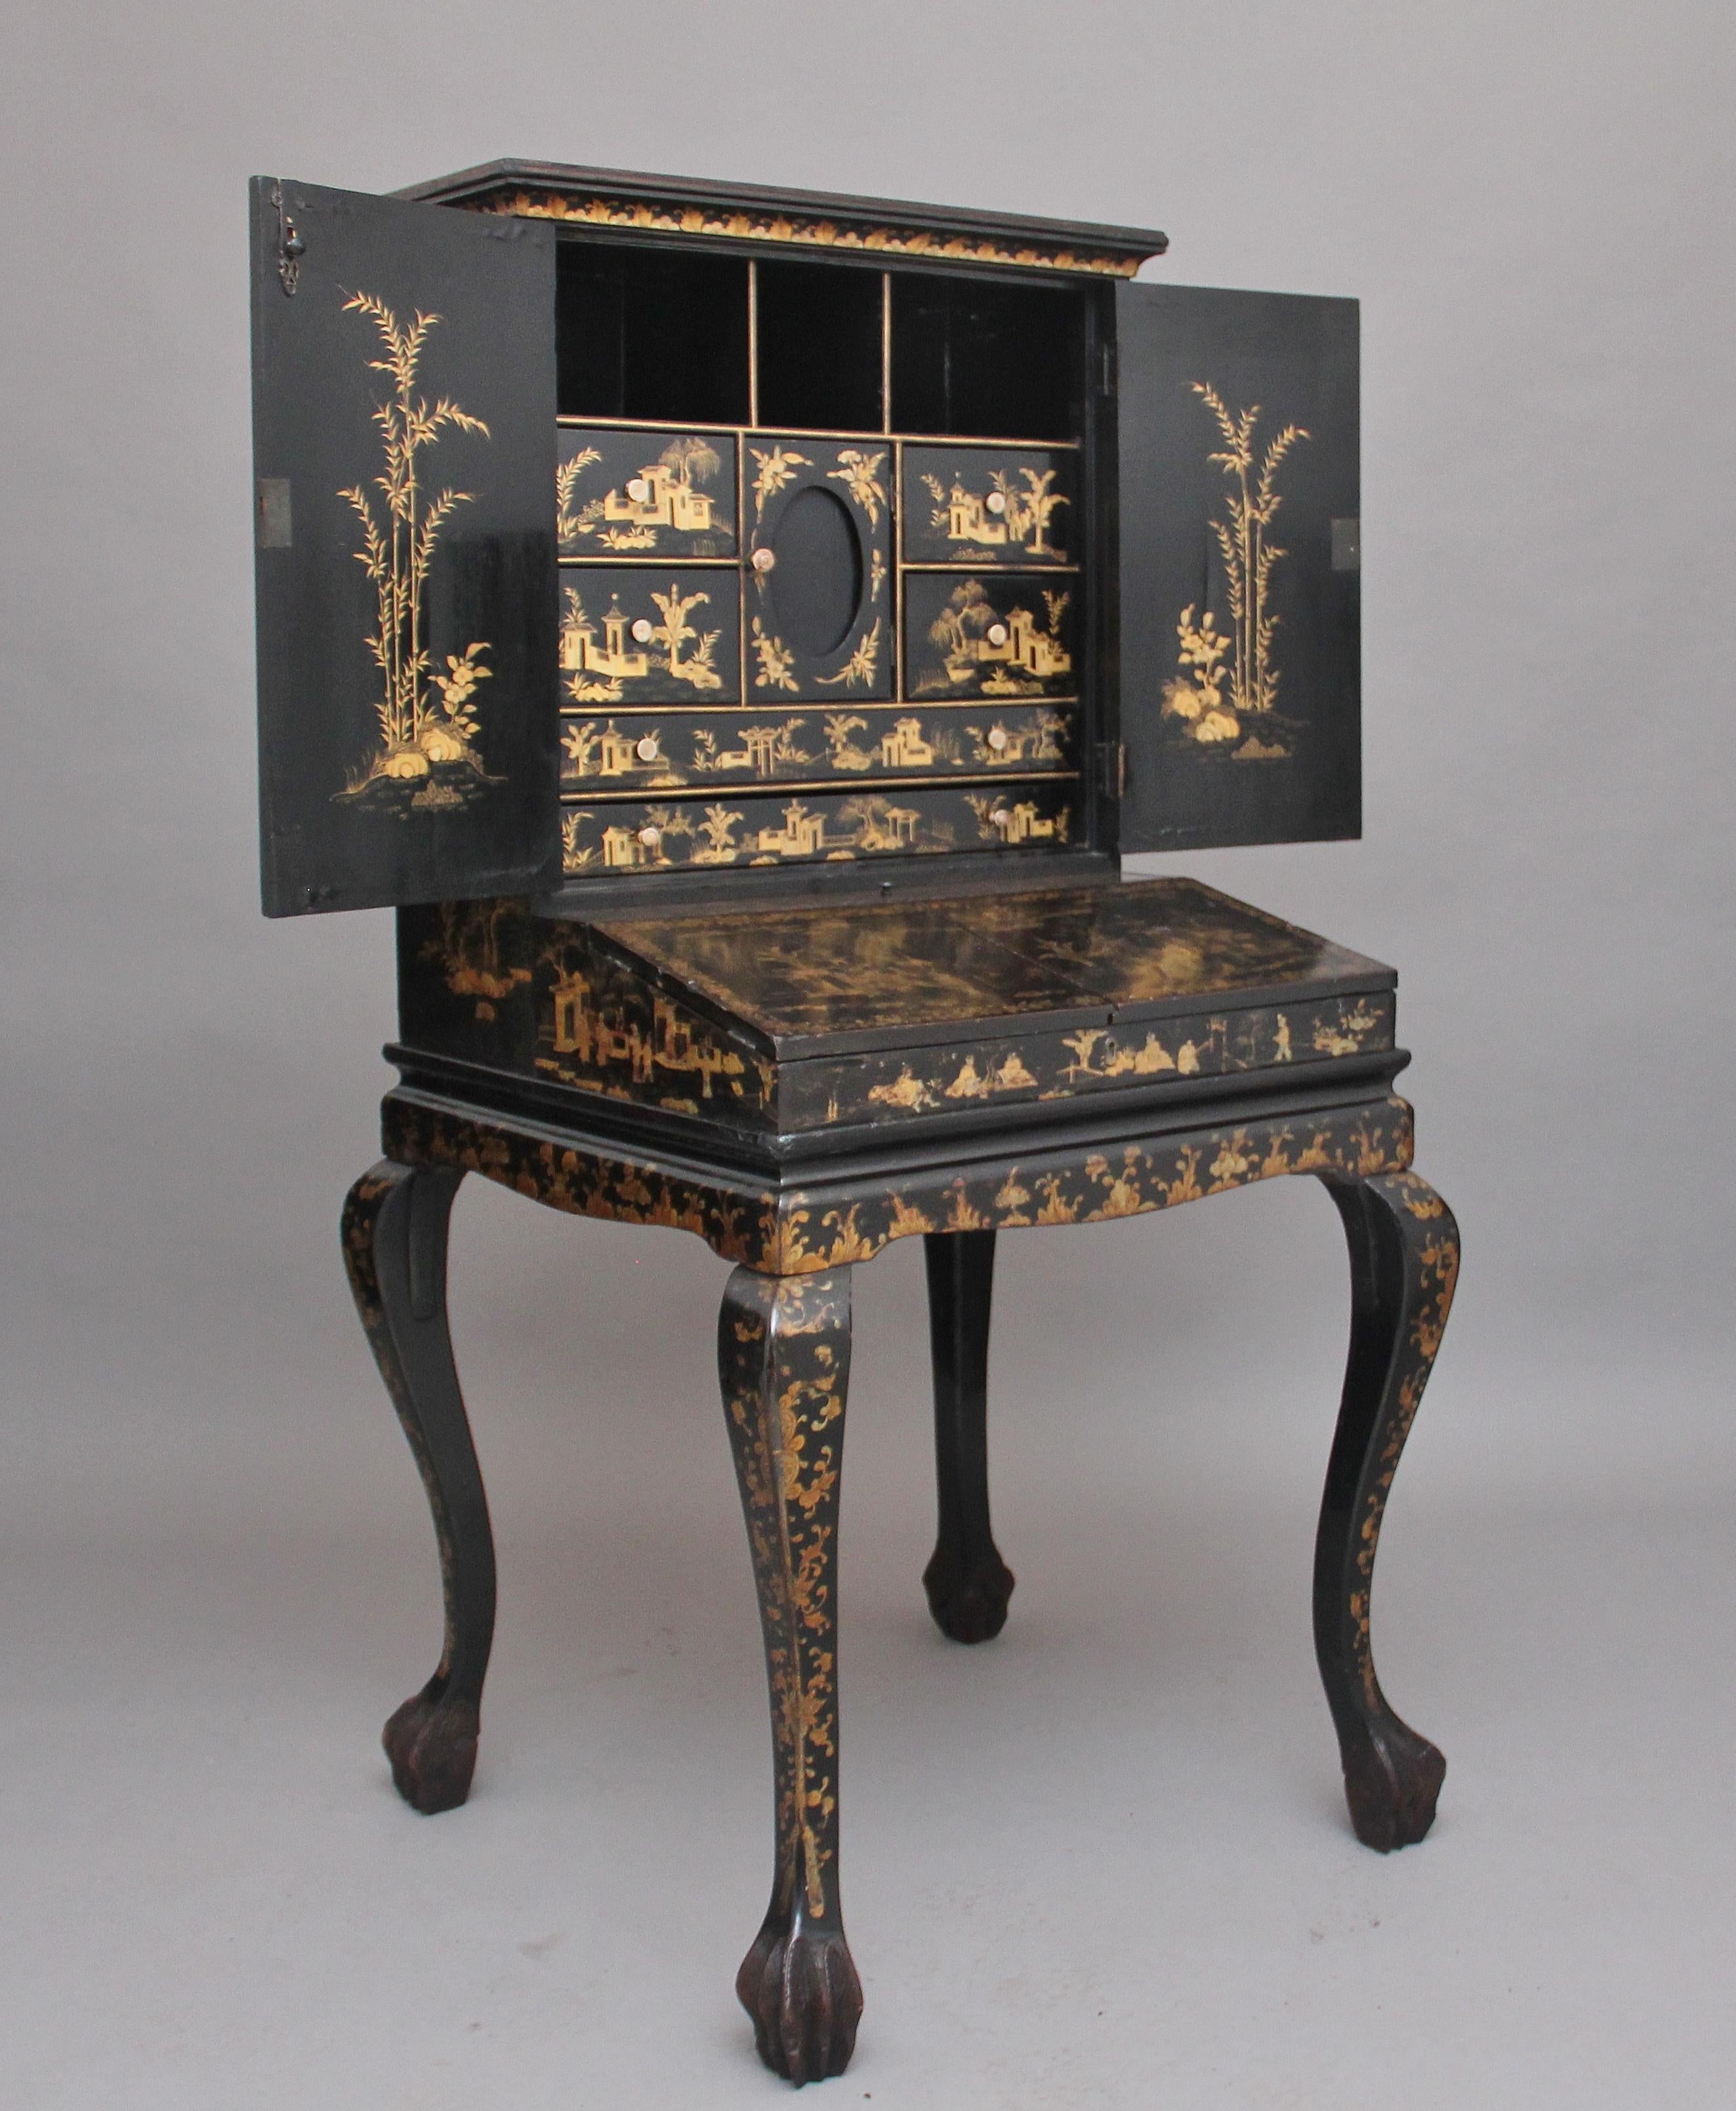 A superb quality early 19th century chinoiserie Bonheur Du Jour, the top section profusely decorated at the front and having oval panels depicting a oriental countryside scene, as is with the sides of the cabinet, the doors opening to reveal a